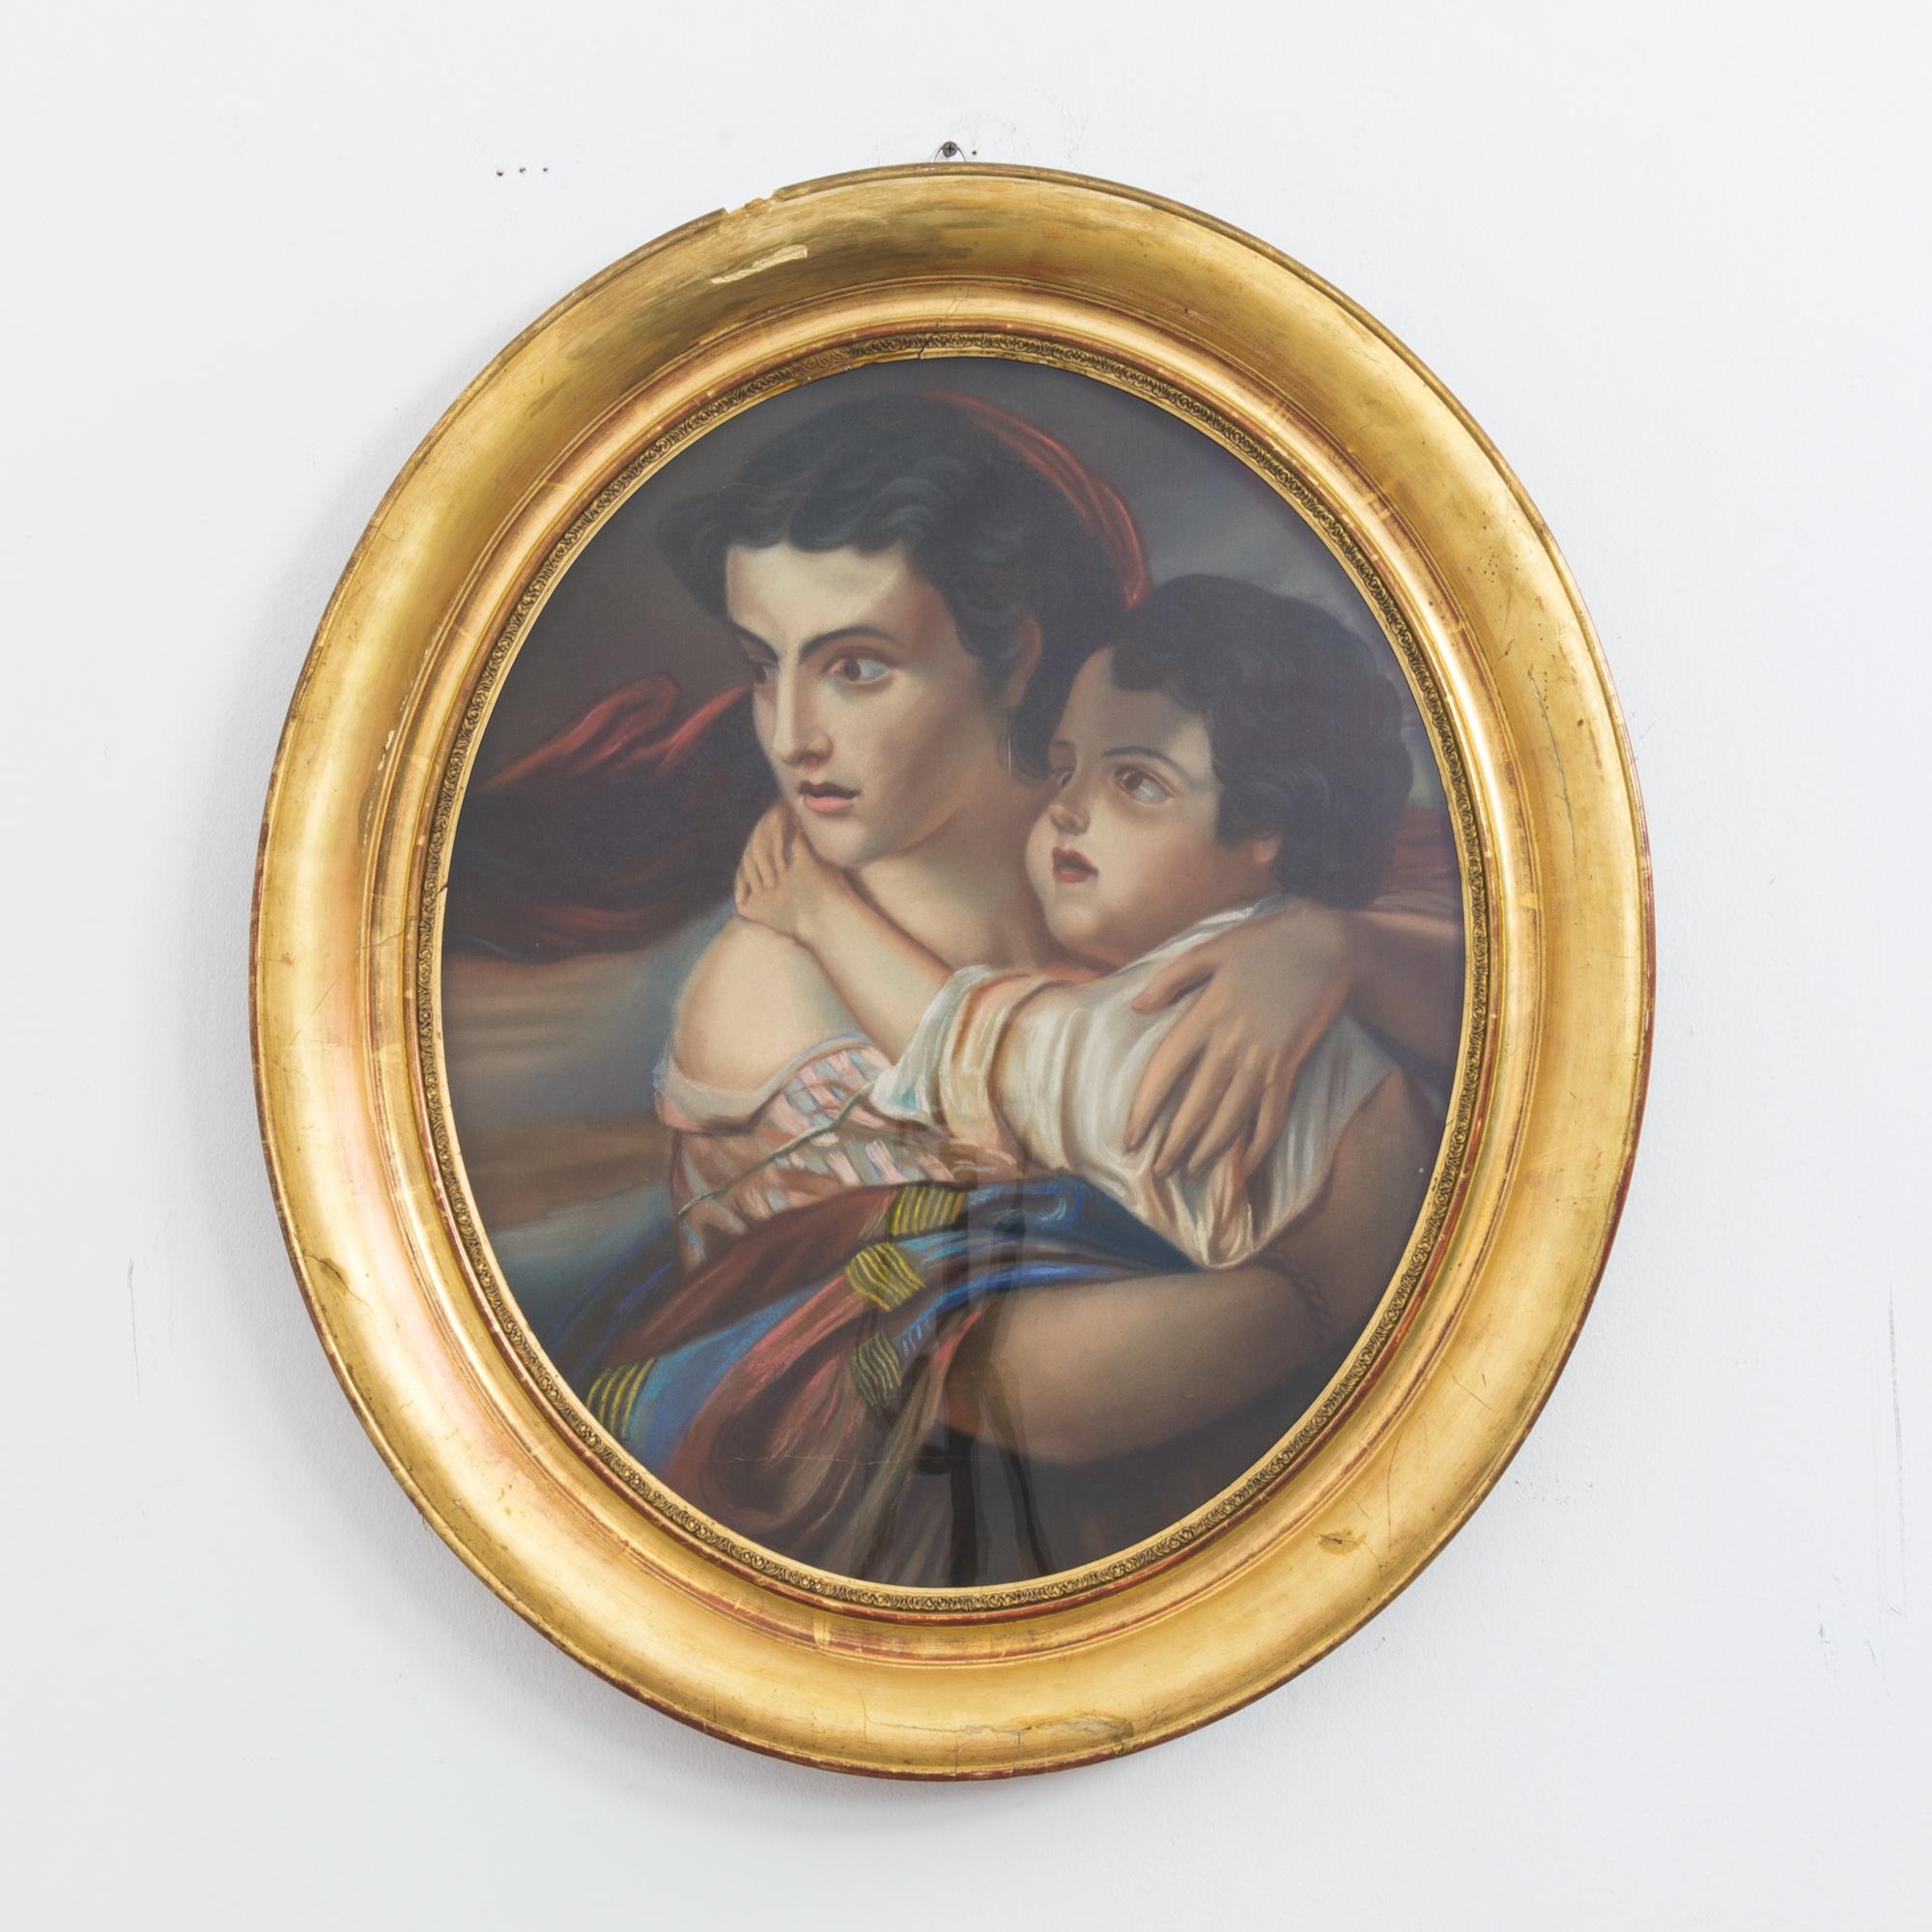 This artwork was made in France, circa 1880, and comes with an oval wooden frame. The painting depicts a young child clinging to the neck of a woman who looks intently toward one side. The rich tones of the drapery and tension in the scene hint at a